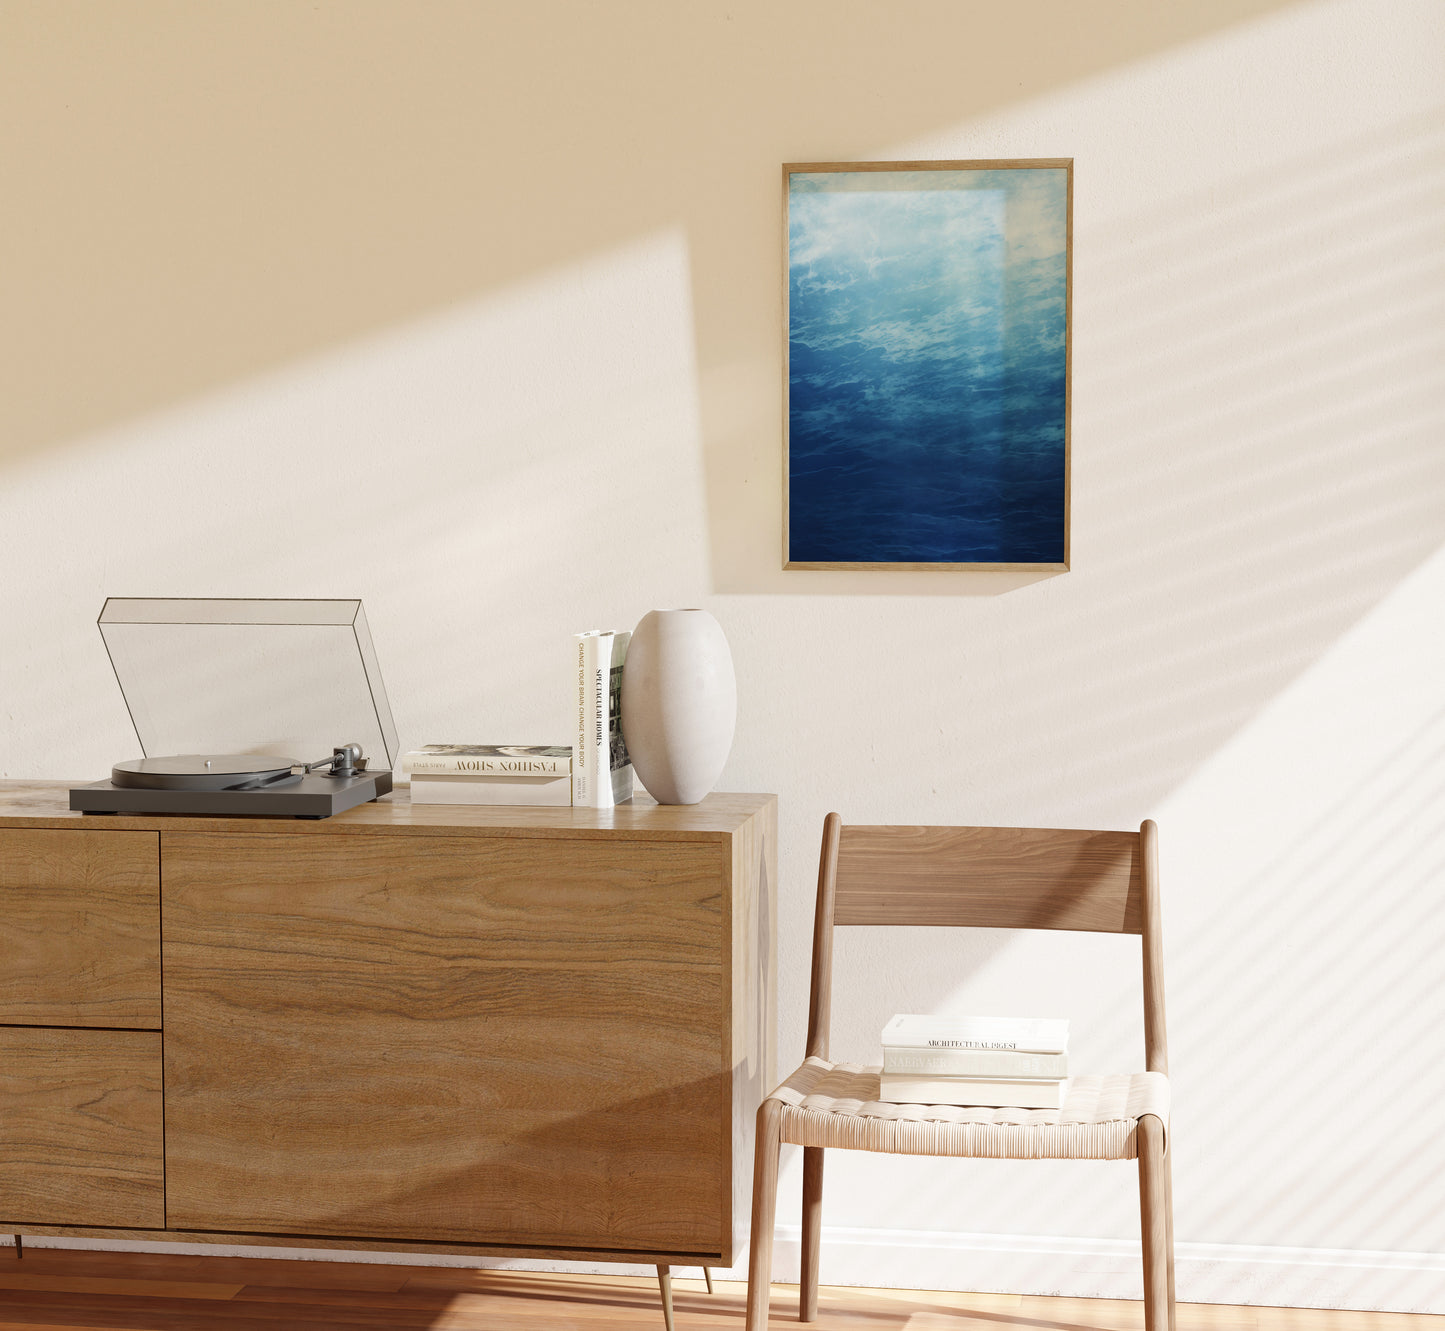 "Modern room with a wooden sideboard, turntable, white chair, books, and a blue abstract painting on the wall."